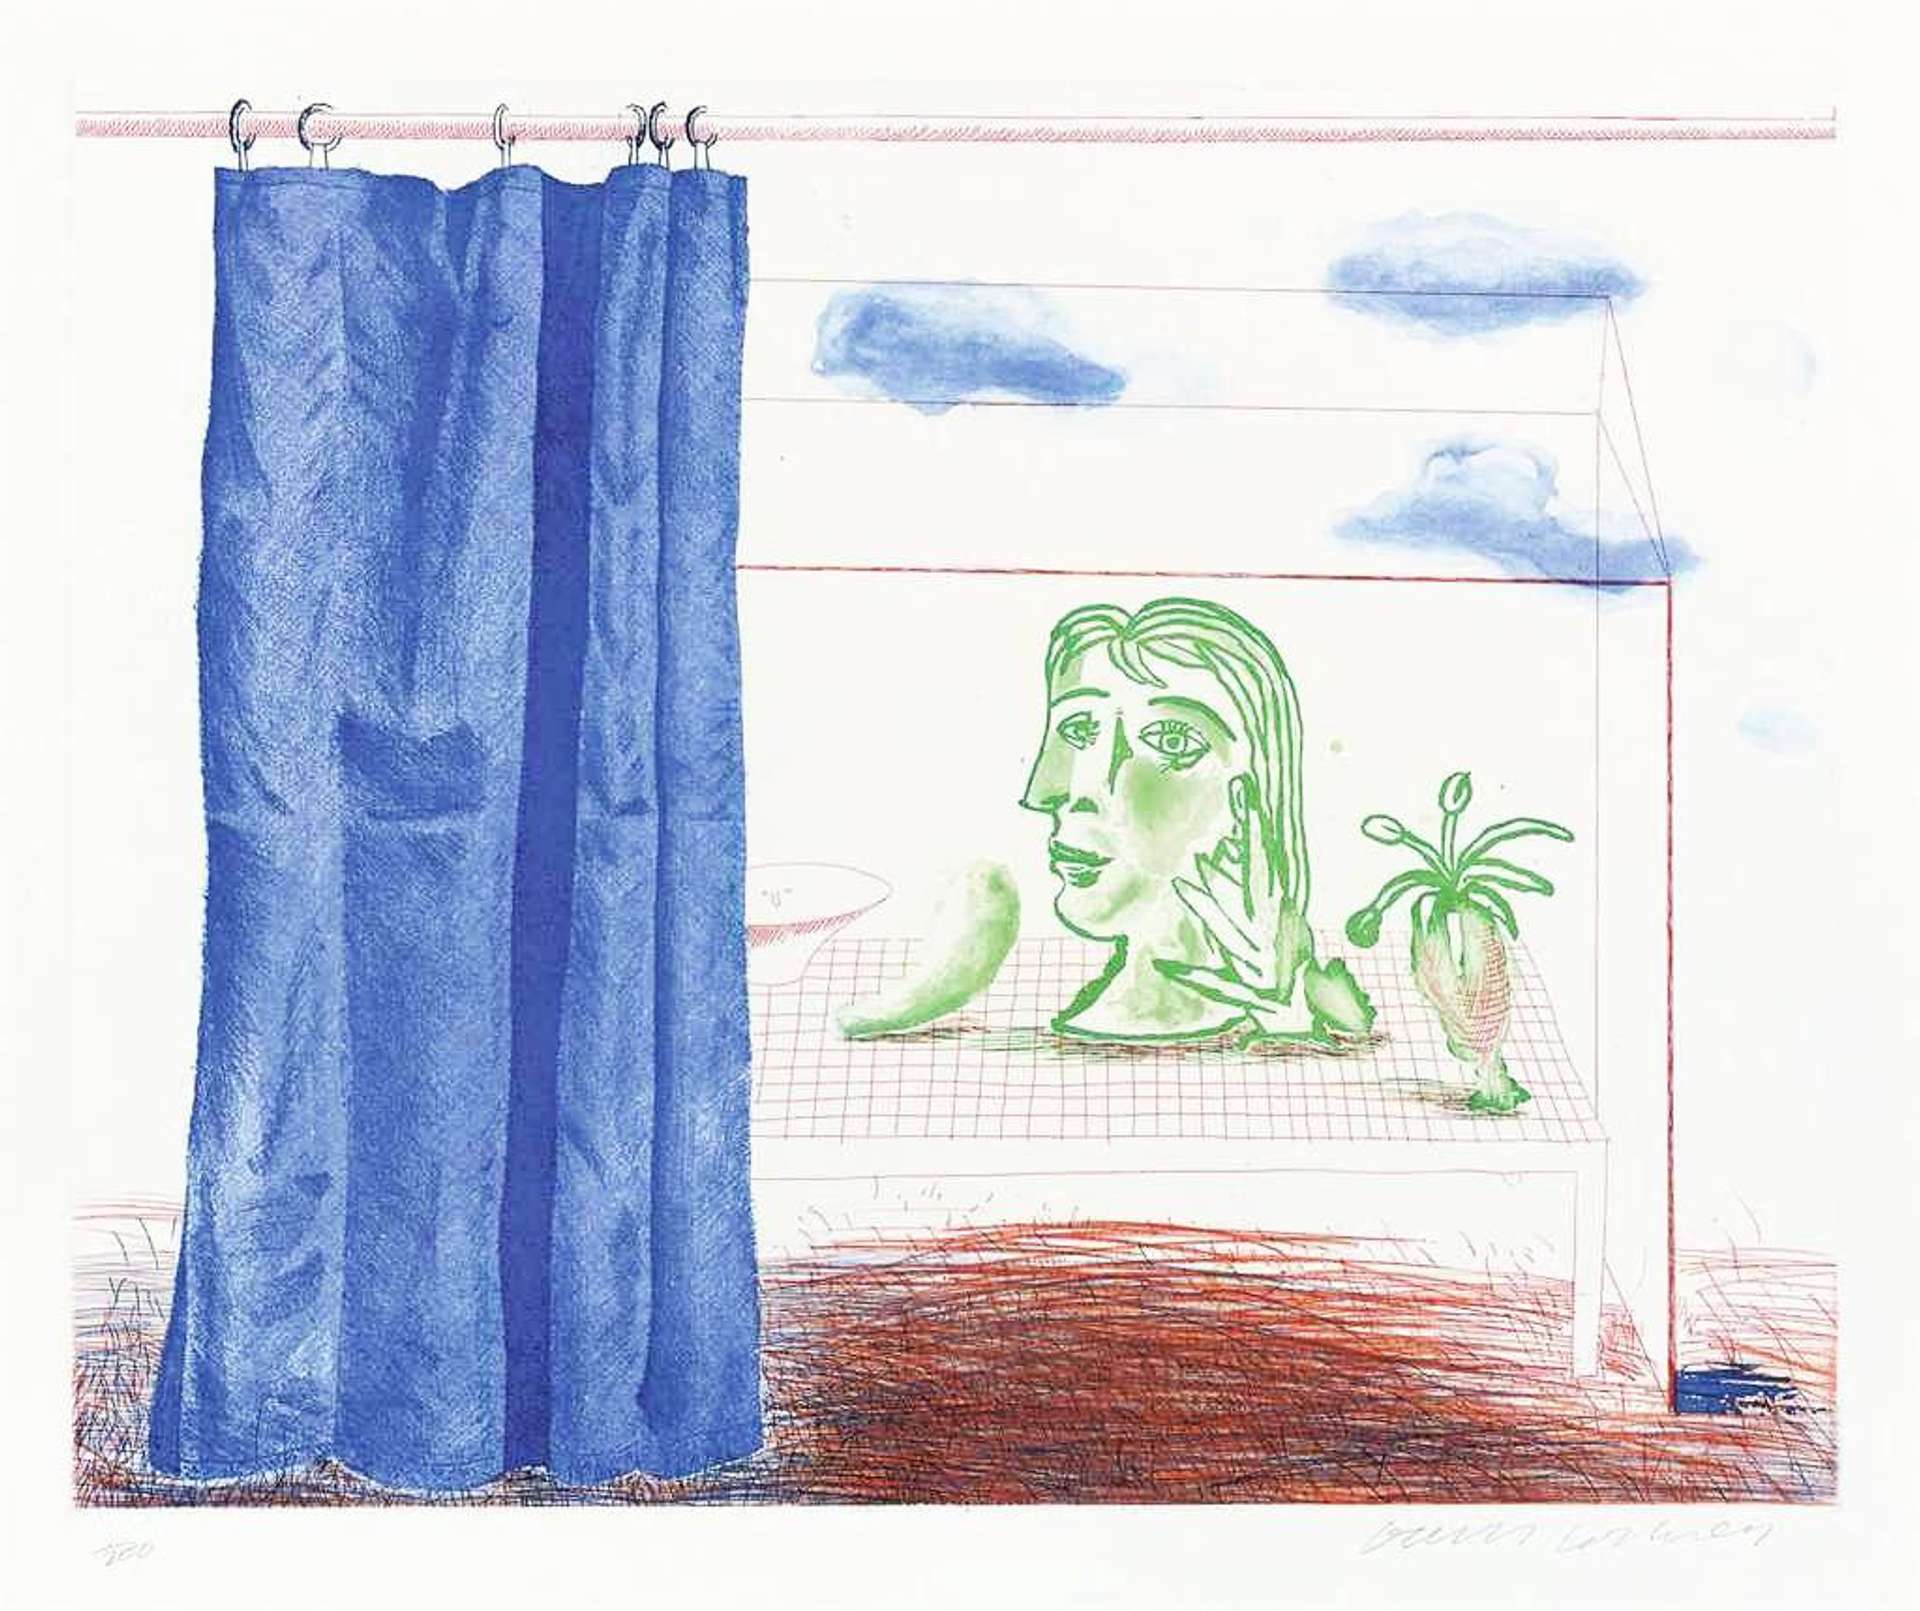 Featuring a curtain, a still life of flowers, a grid like pattern and clouds of blue ink, this work from David Hockney’s The Blue Guitar series is in keeping with much of the subject matter and style throughout the portfolio. Here though, Hockney has also decided to include a copy of Picasso's head of Dora Maar, in green ink.